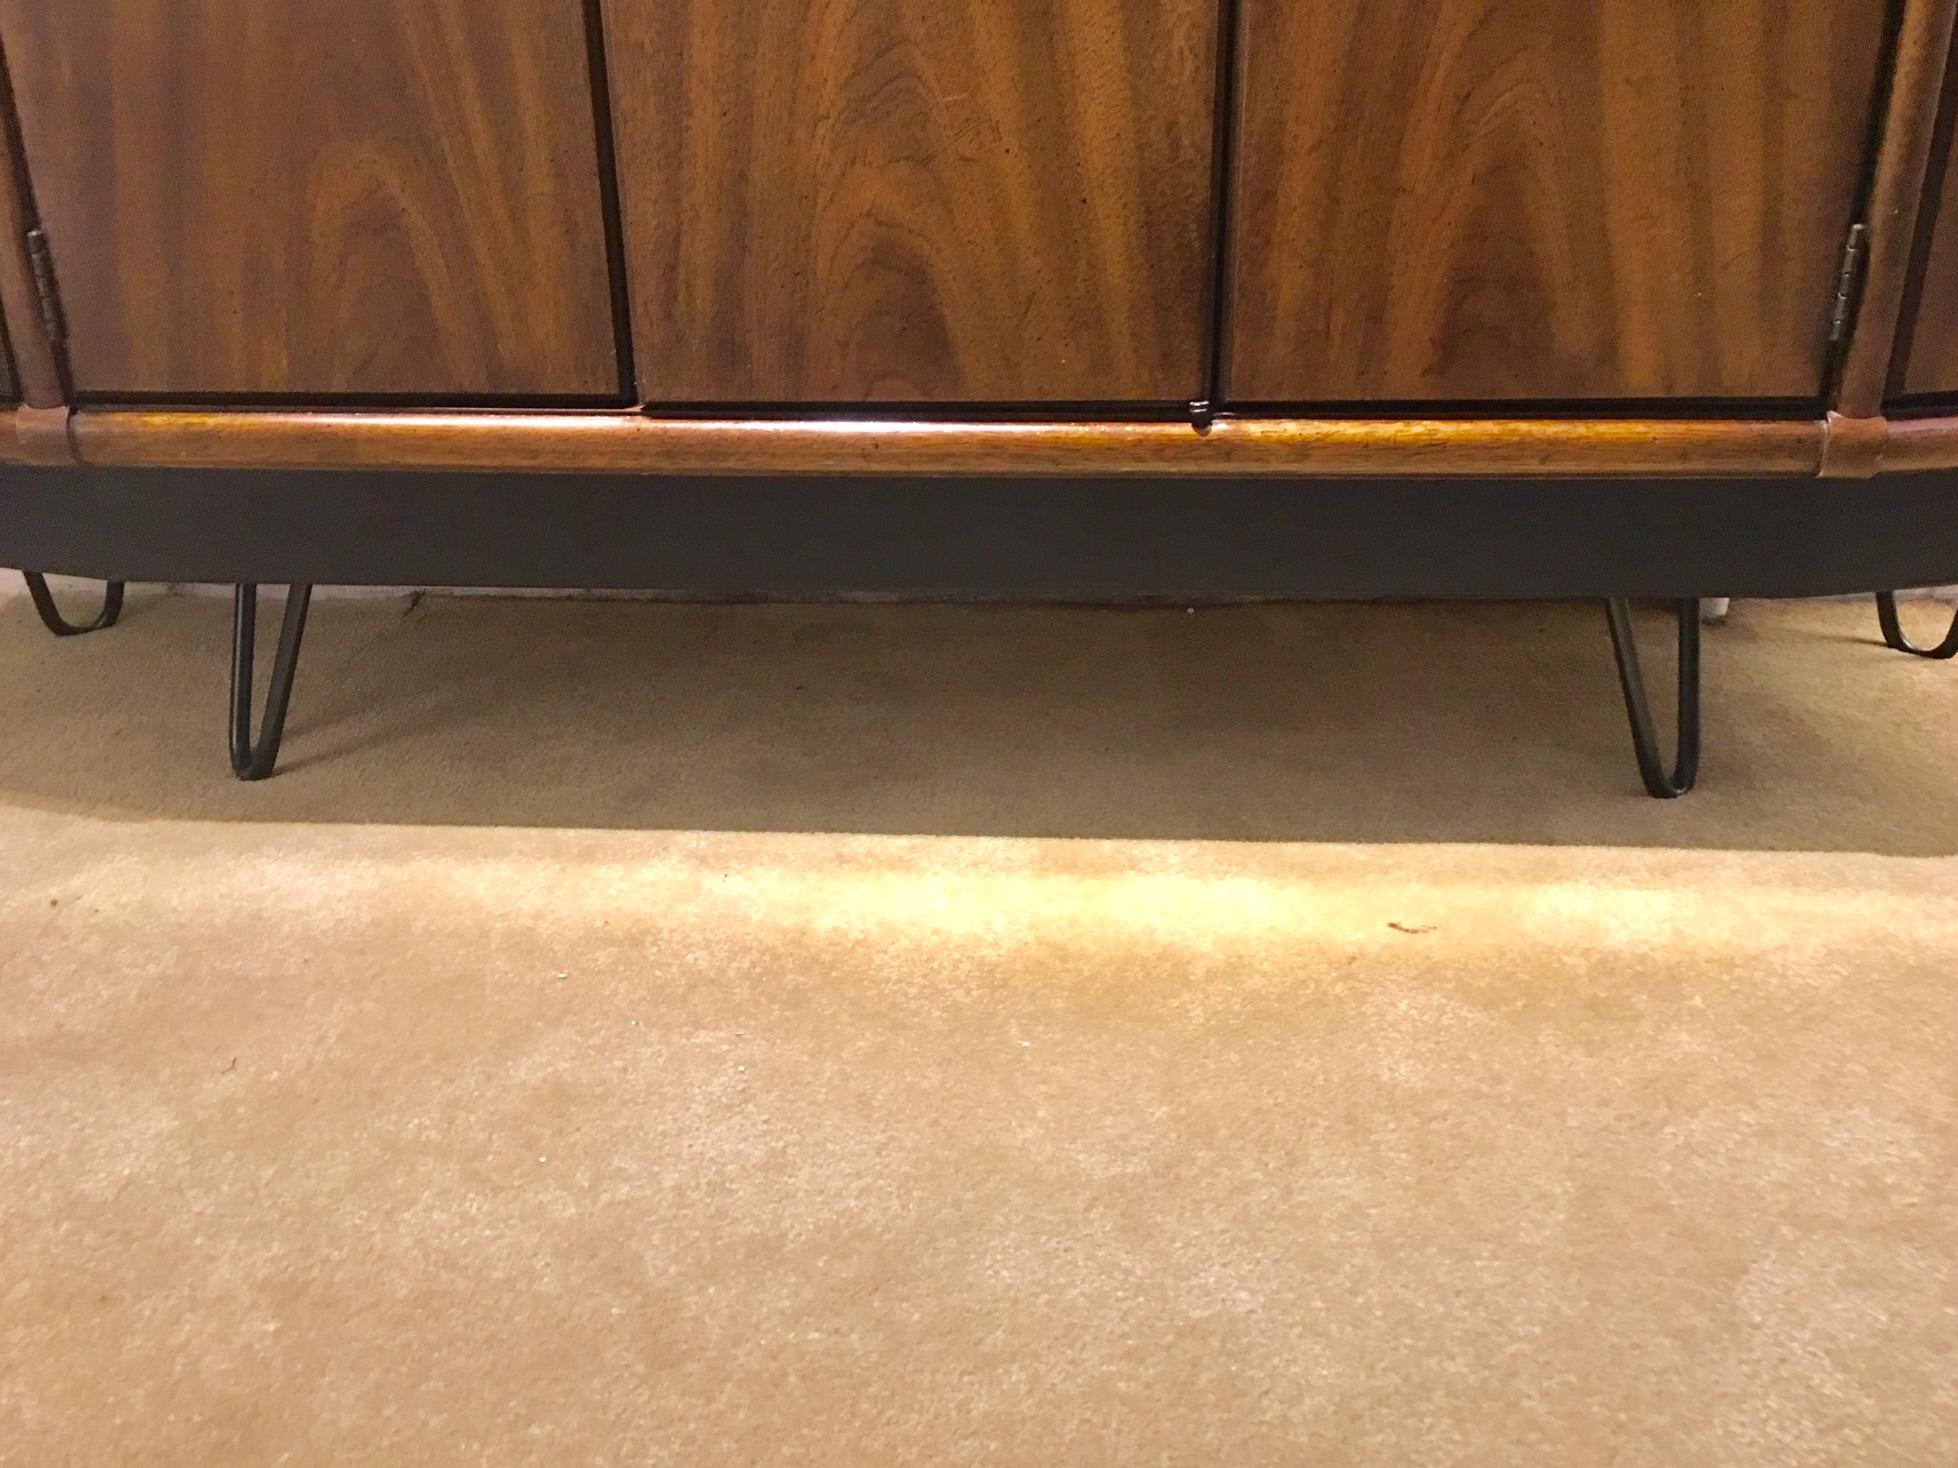 Drexel Accolade Credenza or Buffet In Good Condition For Sale In Raleigh, NC